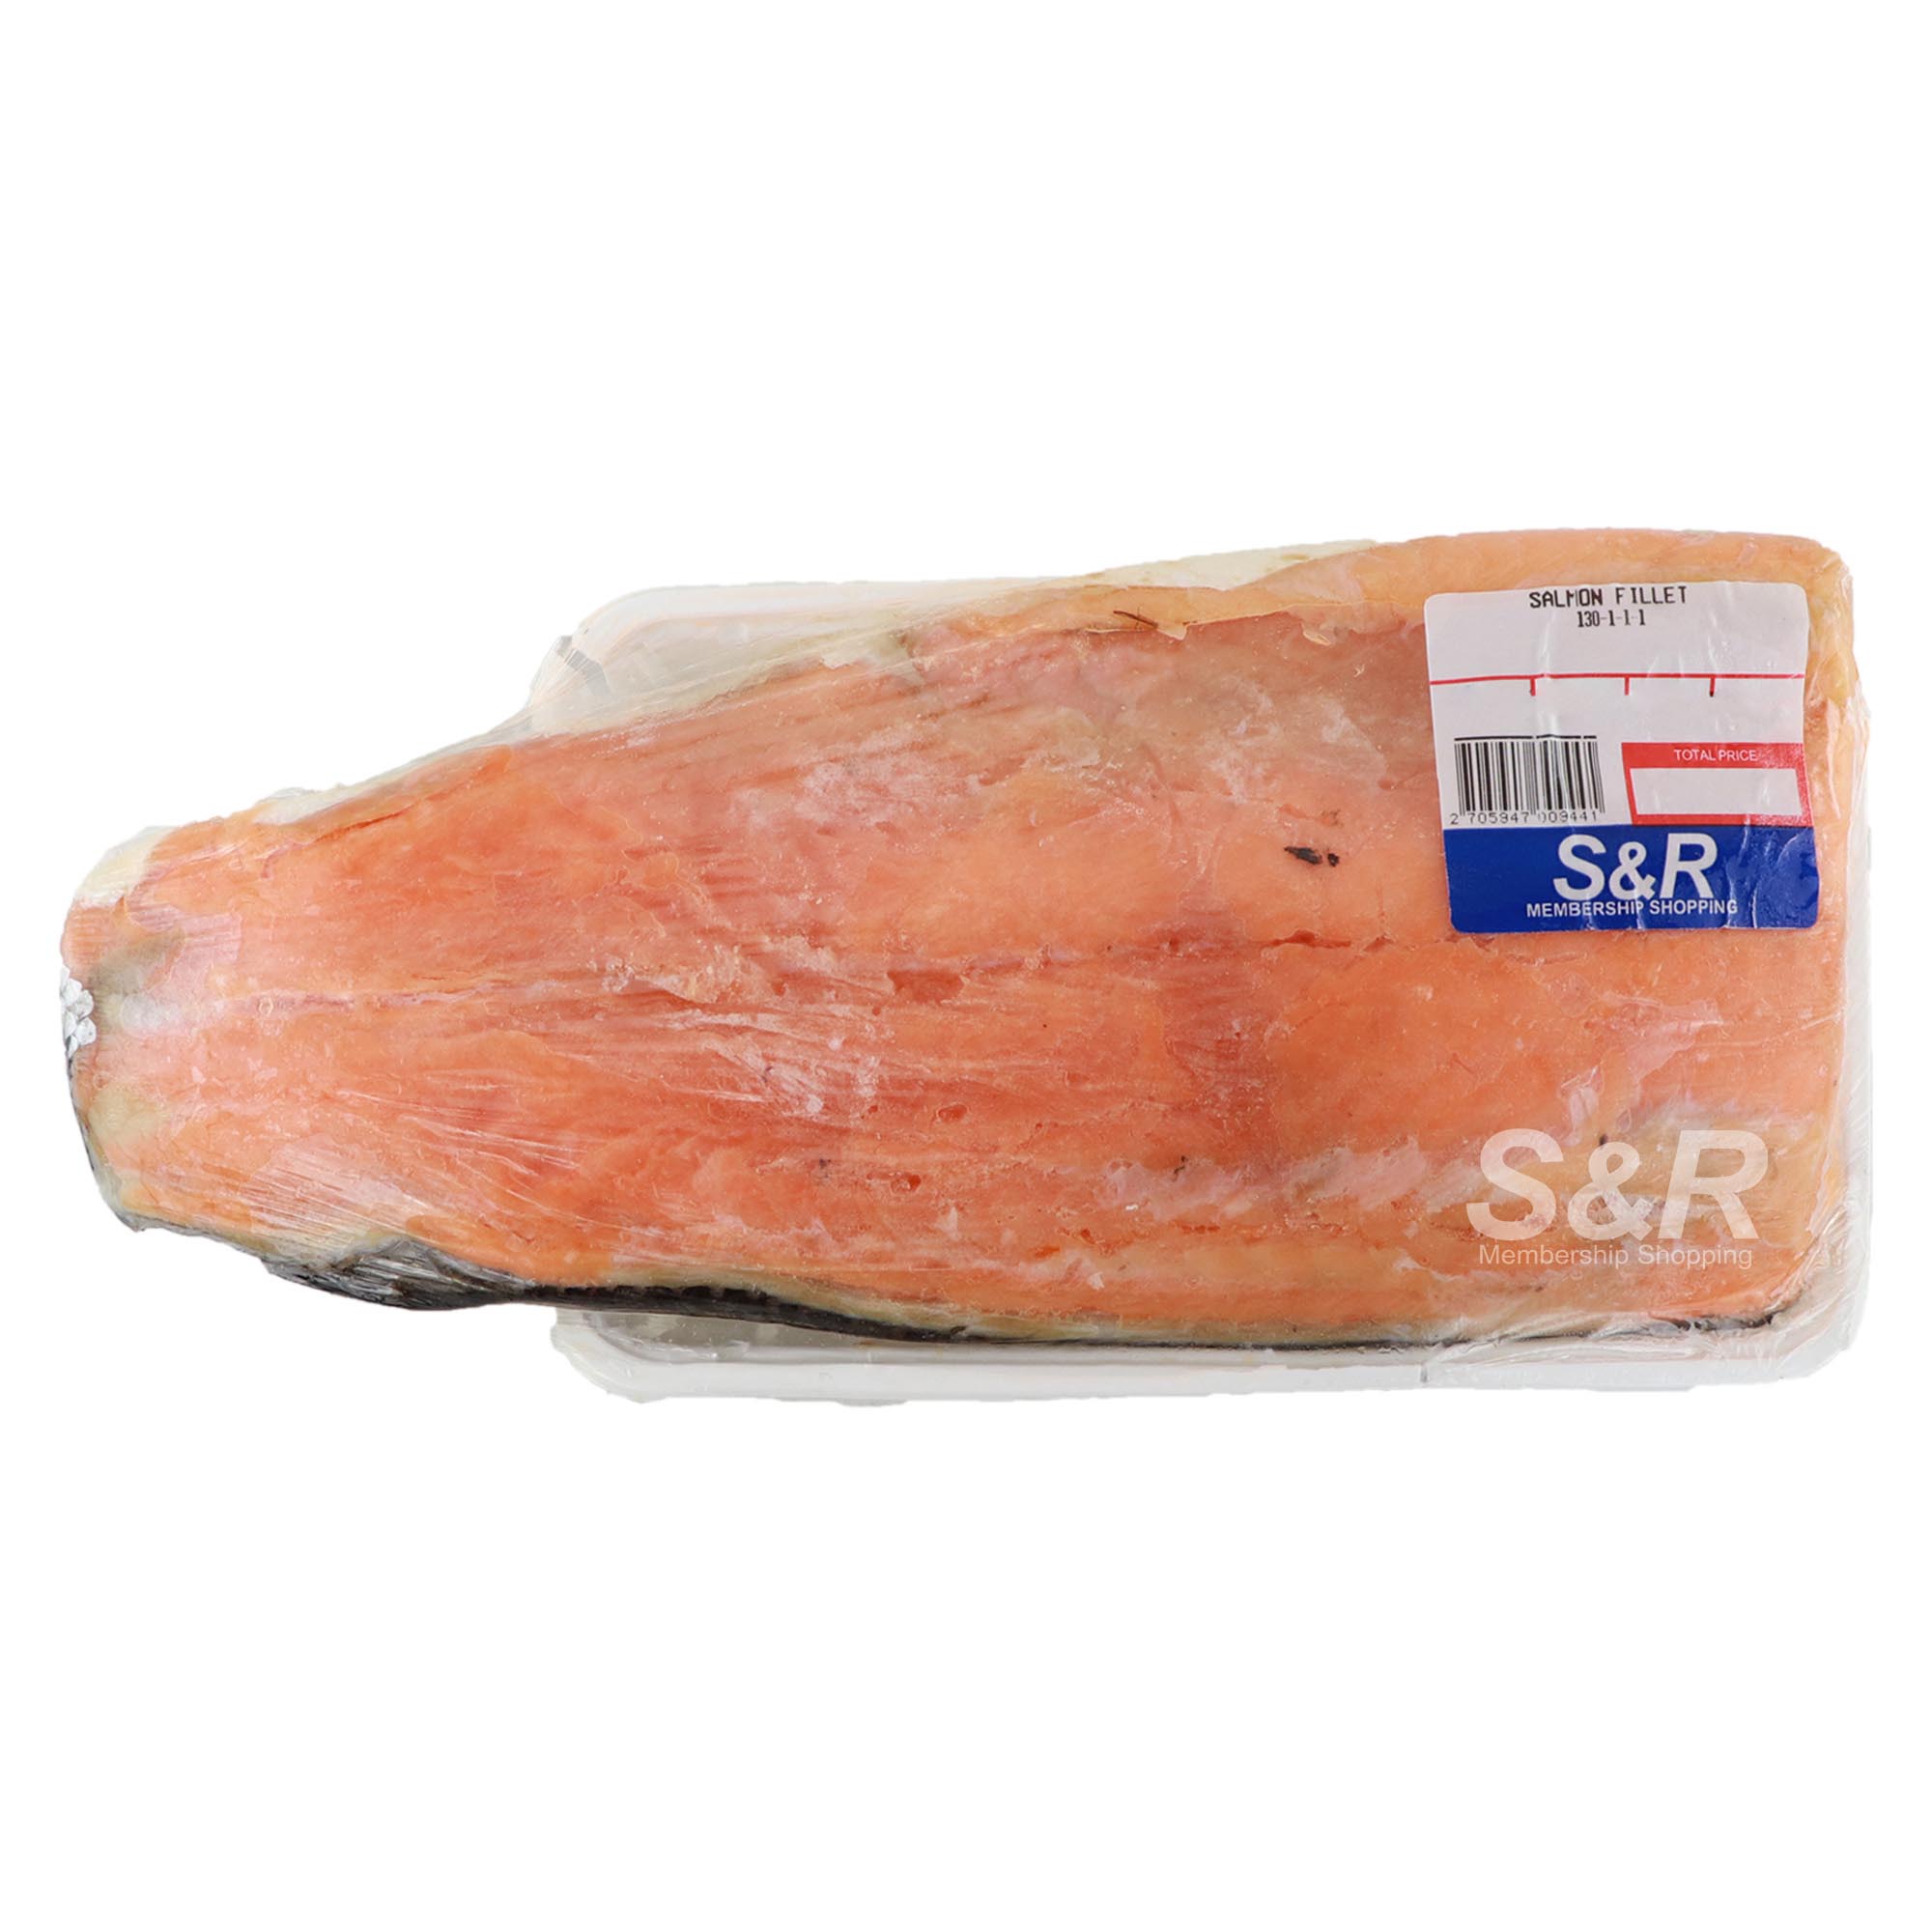 S&R Salmon Fillet approx. 1.3kg